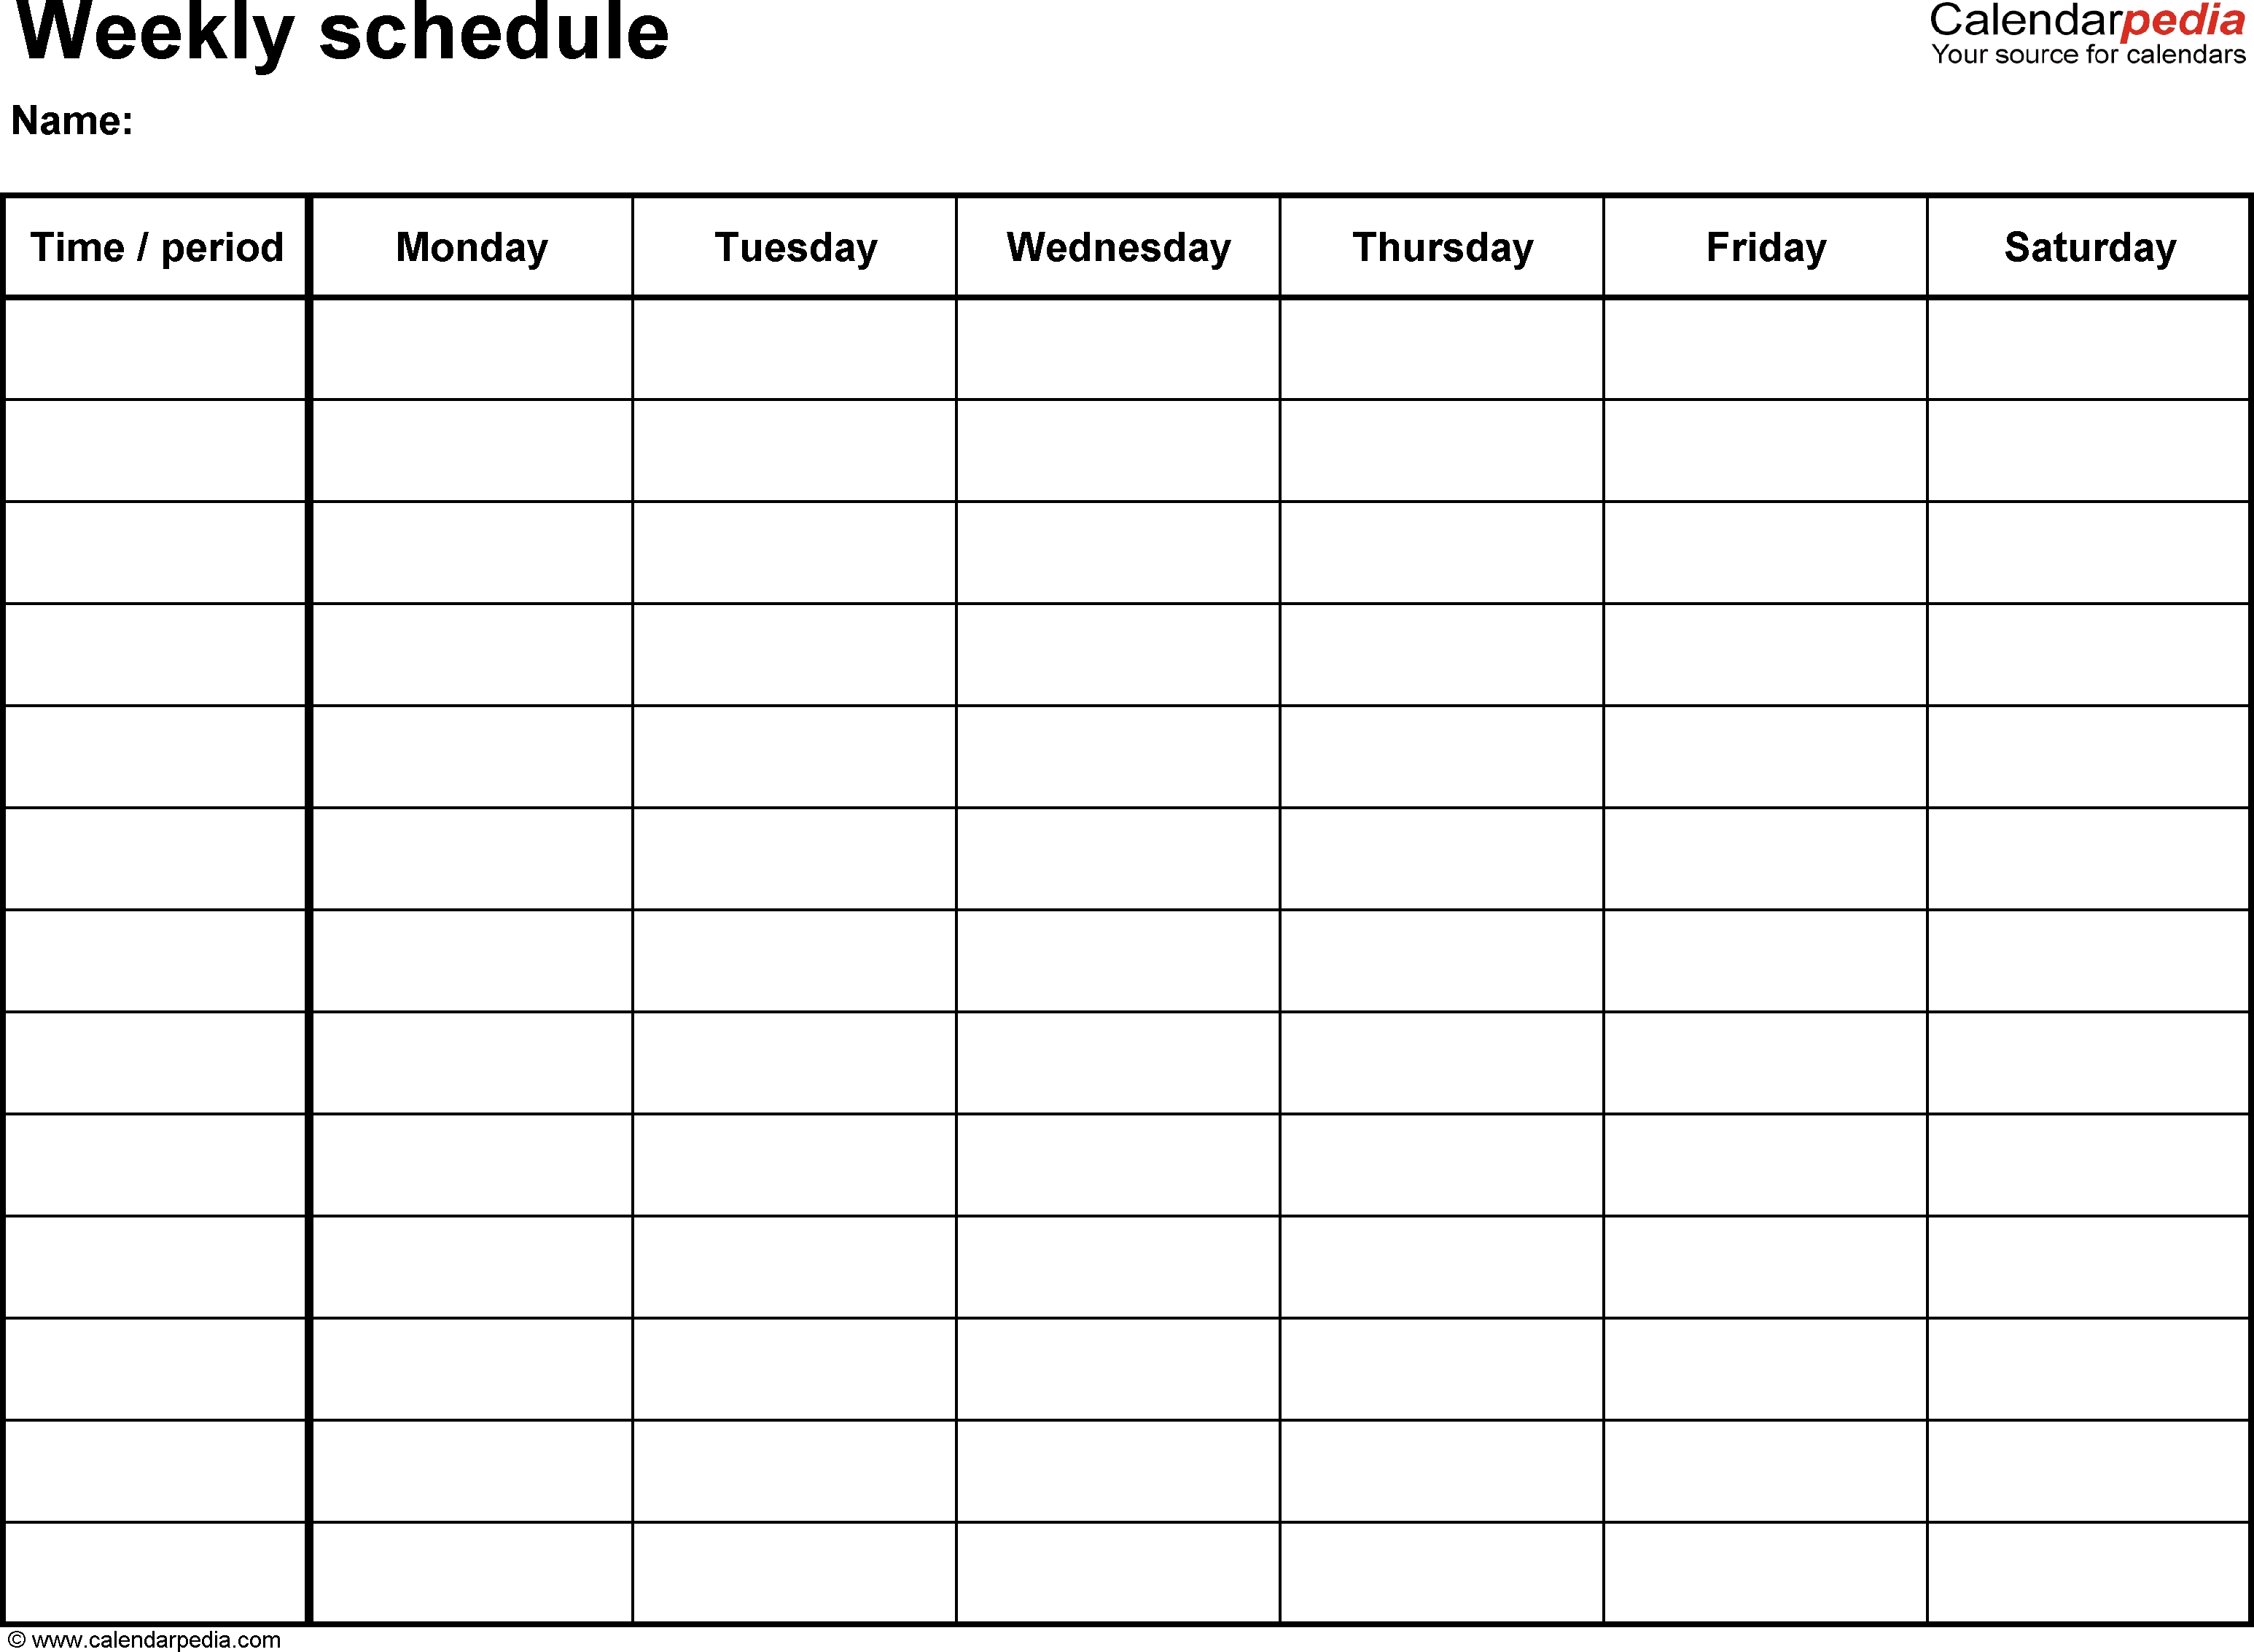 Free Weekly Schedule Templates For Word - 18 Templates intended for Monday To Friday Weekly Planner